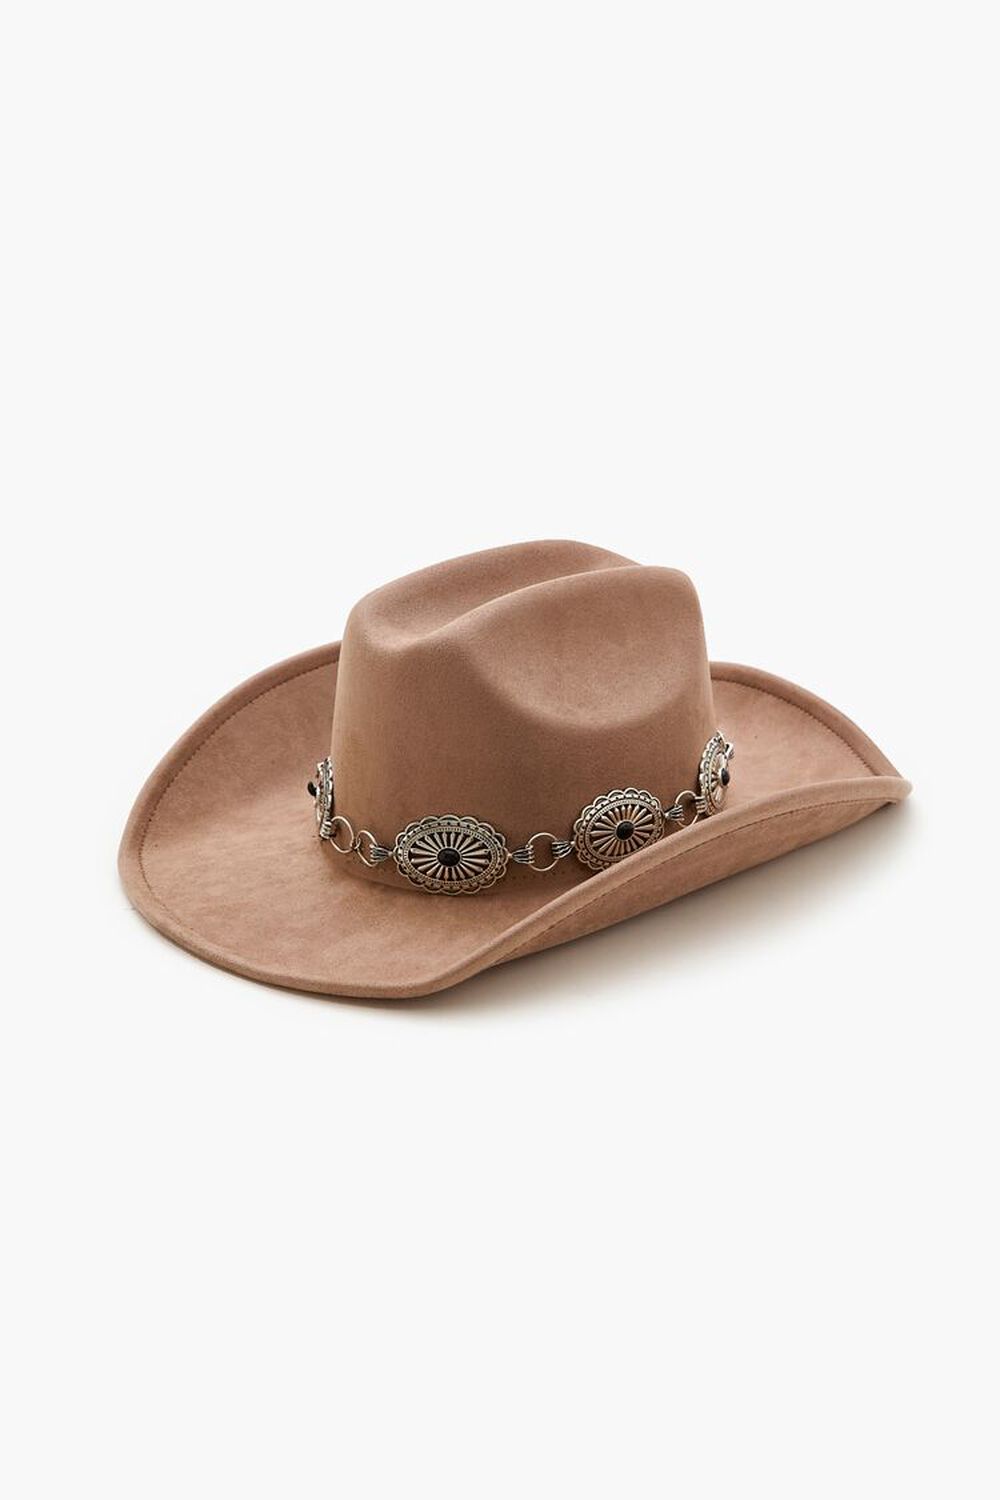 TAUPE/SILVER Faux Stone Chain Cowboy Hat, image 2